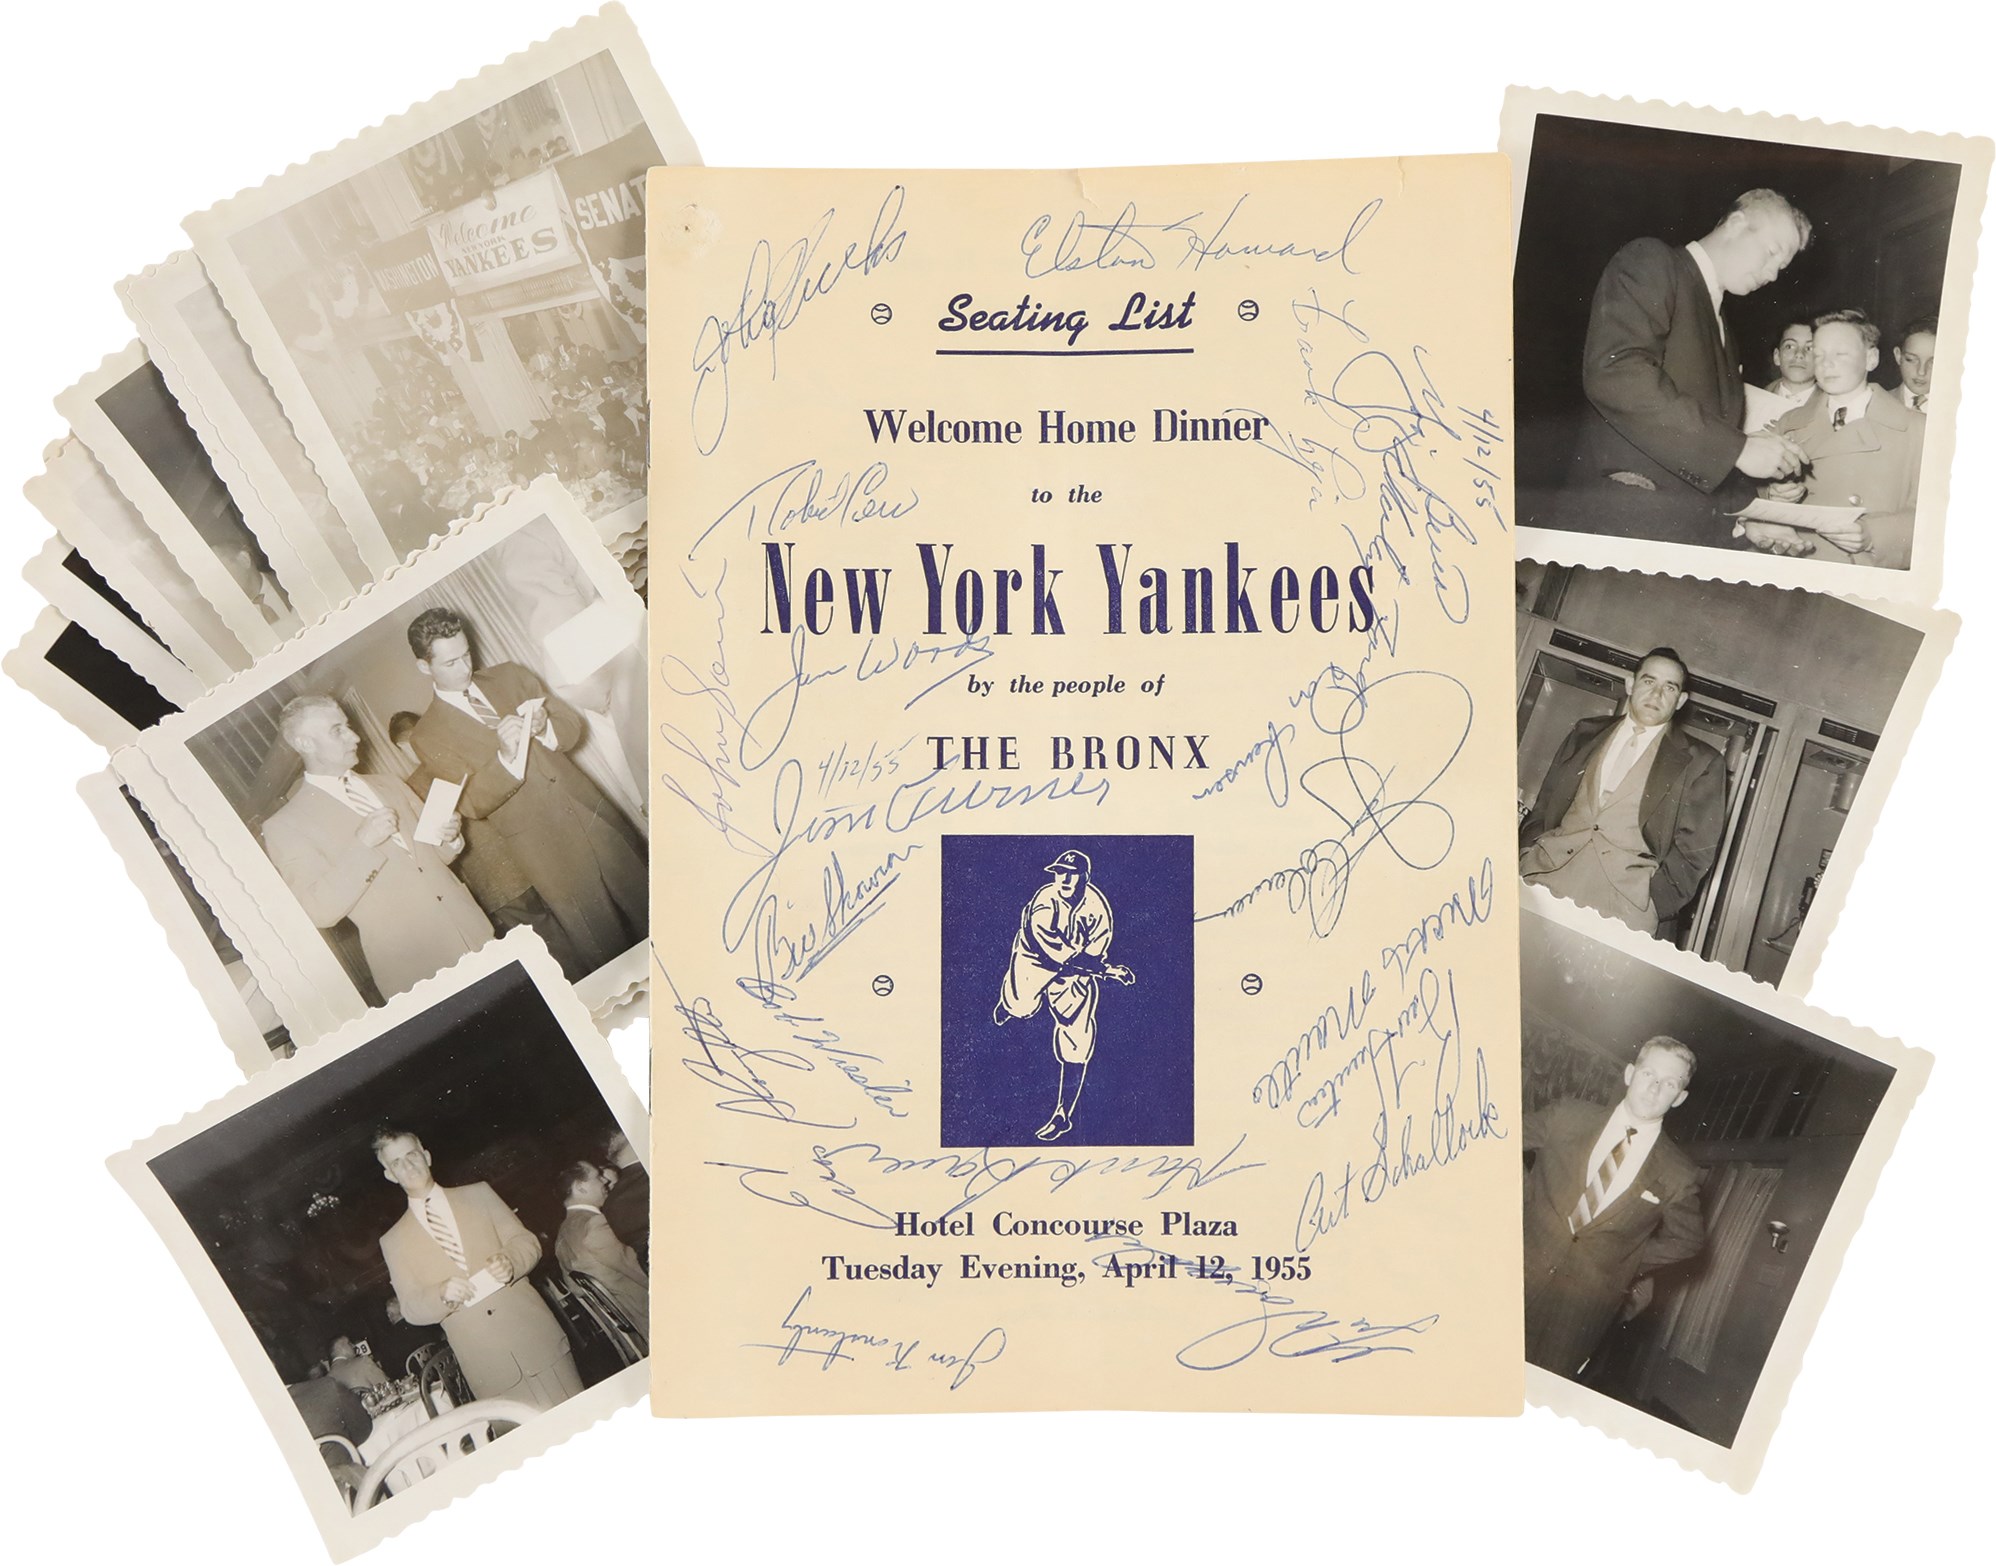 Baseball Autographs - 1955 Welcome Home Dinner Signed Program with Mickey Mantle - 38 Autos (PSA)